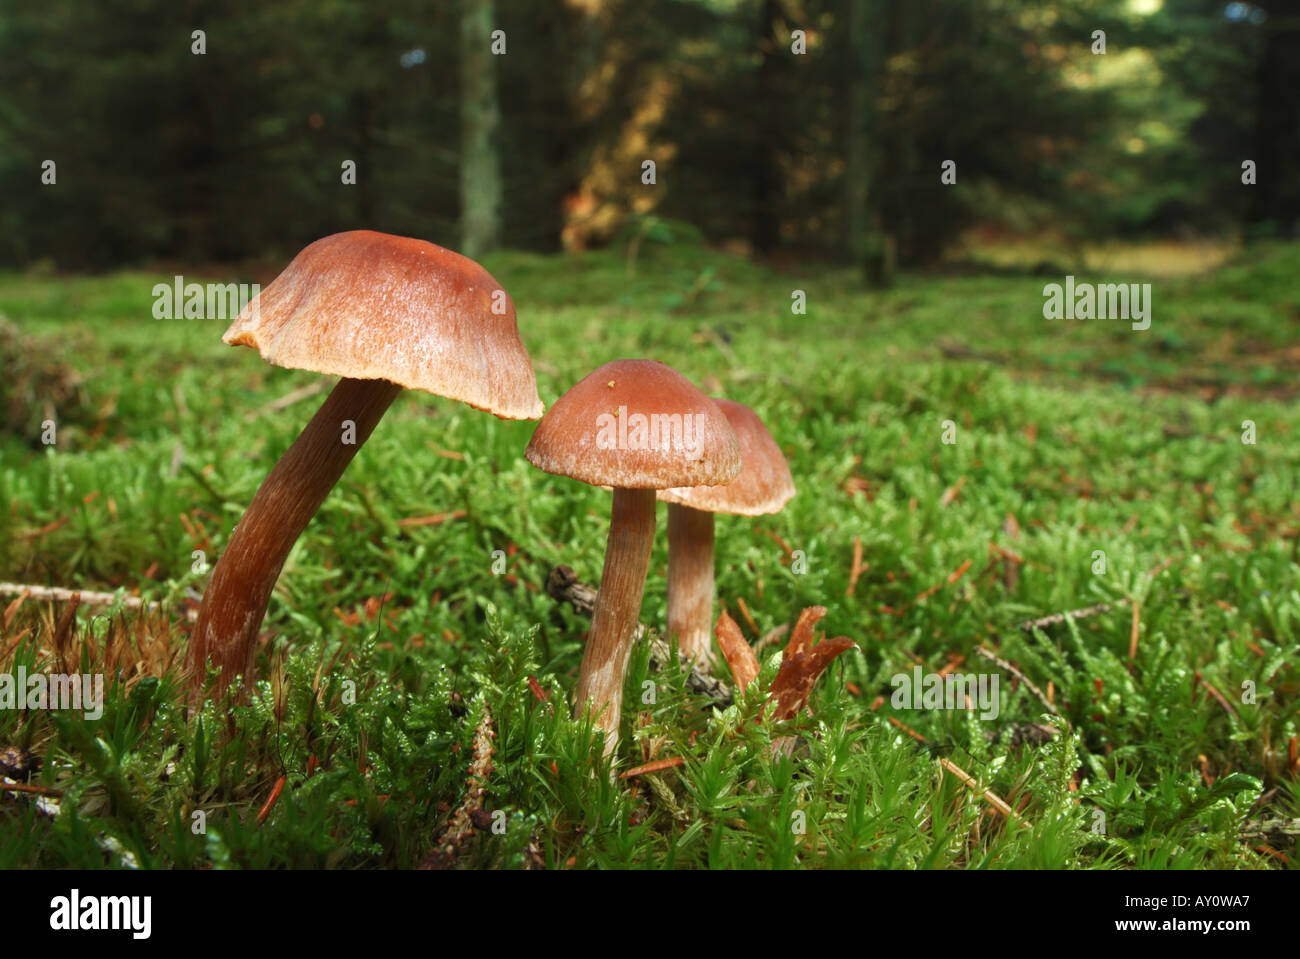 Mushrooms in a spruce forest Stock Photo